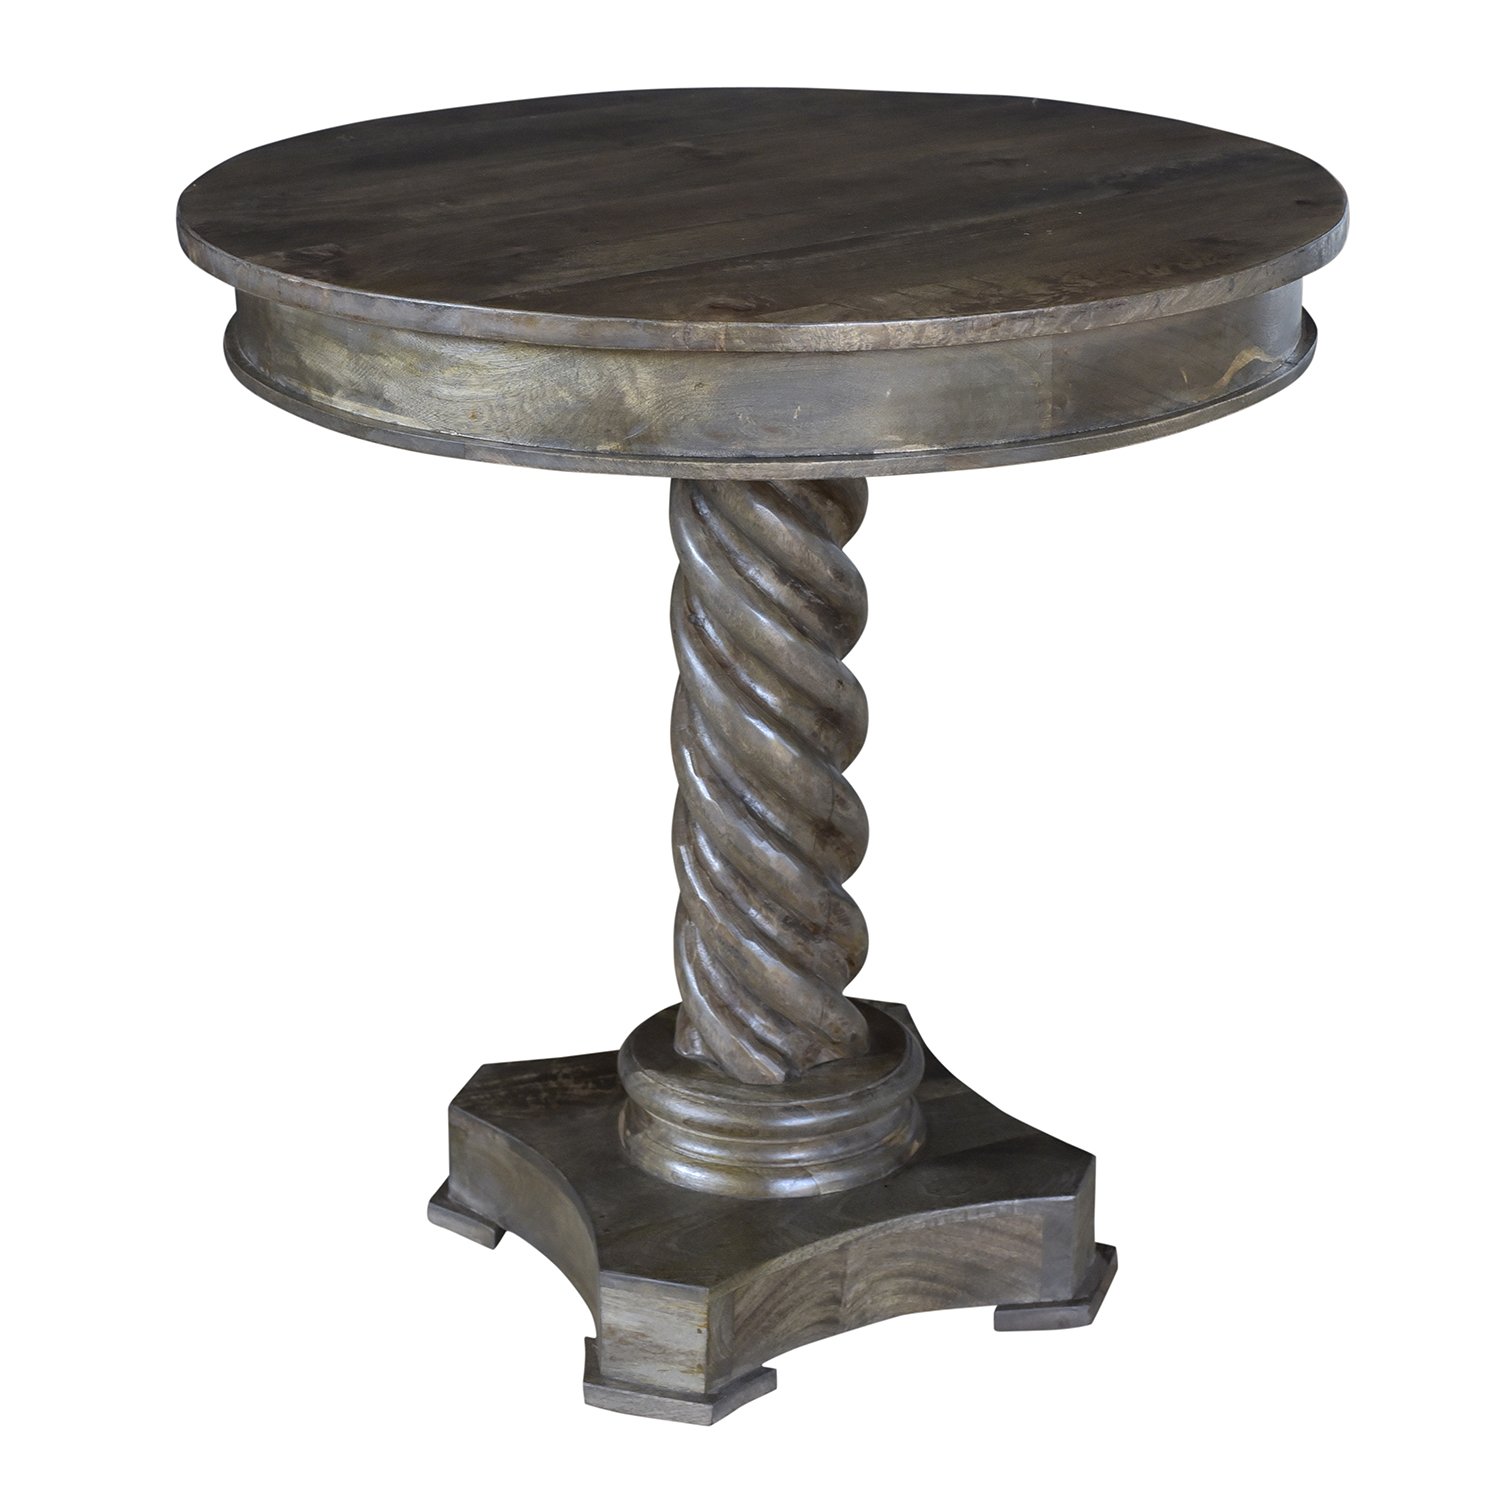 bengal manor mango wood carved rope twist pedestal accent table kitchen dining pottery barn cole task lamp weatherproof outdoor furniture wrought iron side with glass top home